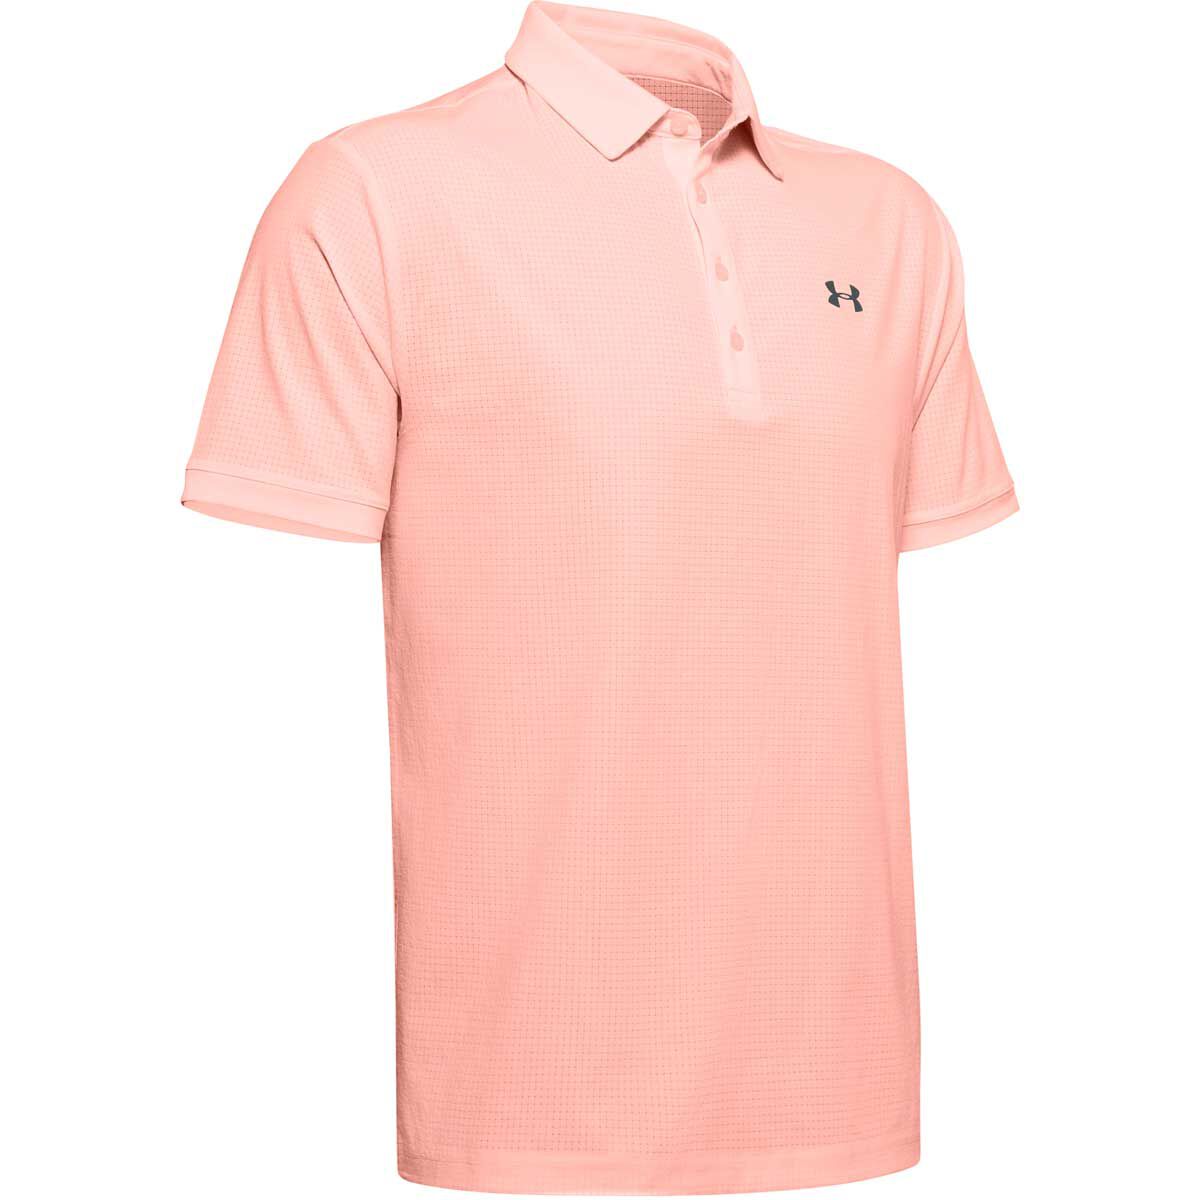 men's under armour pink polo